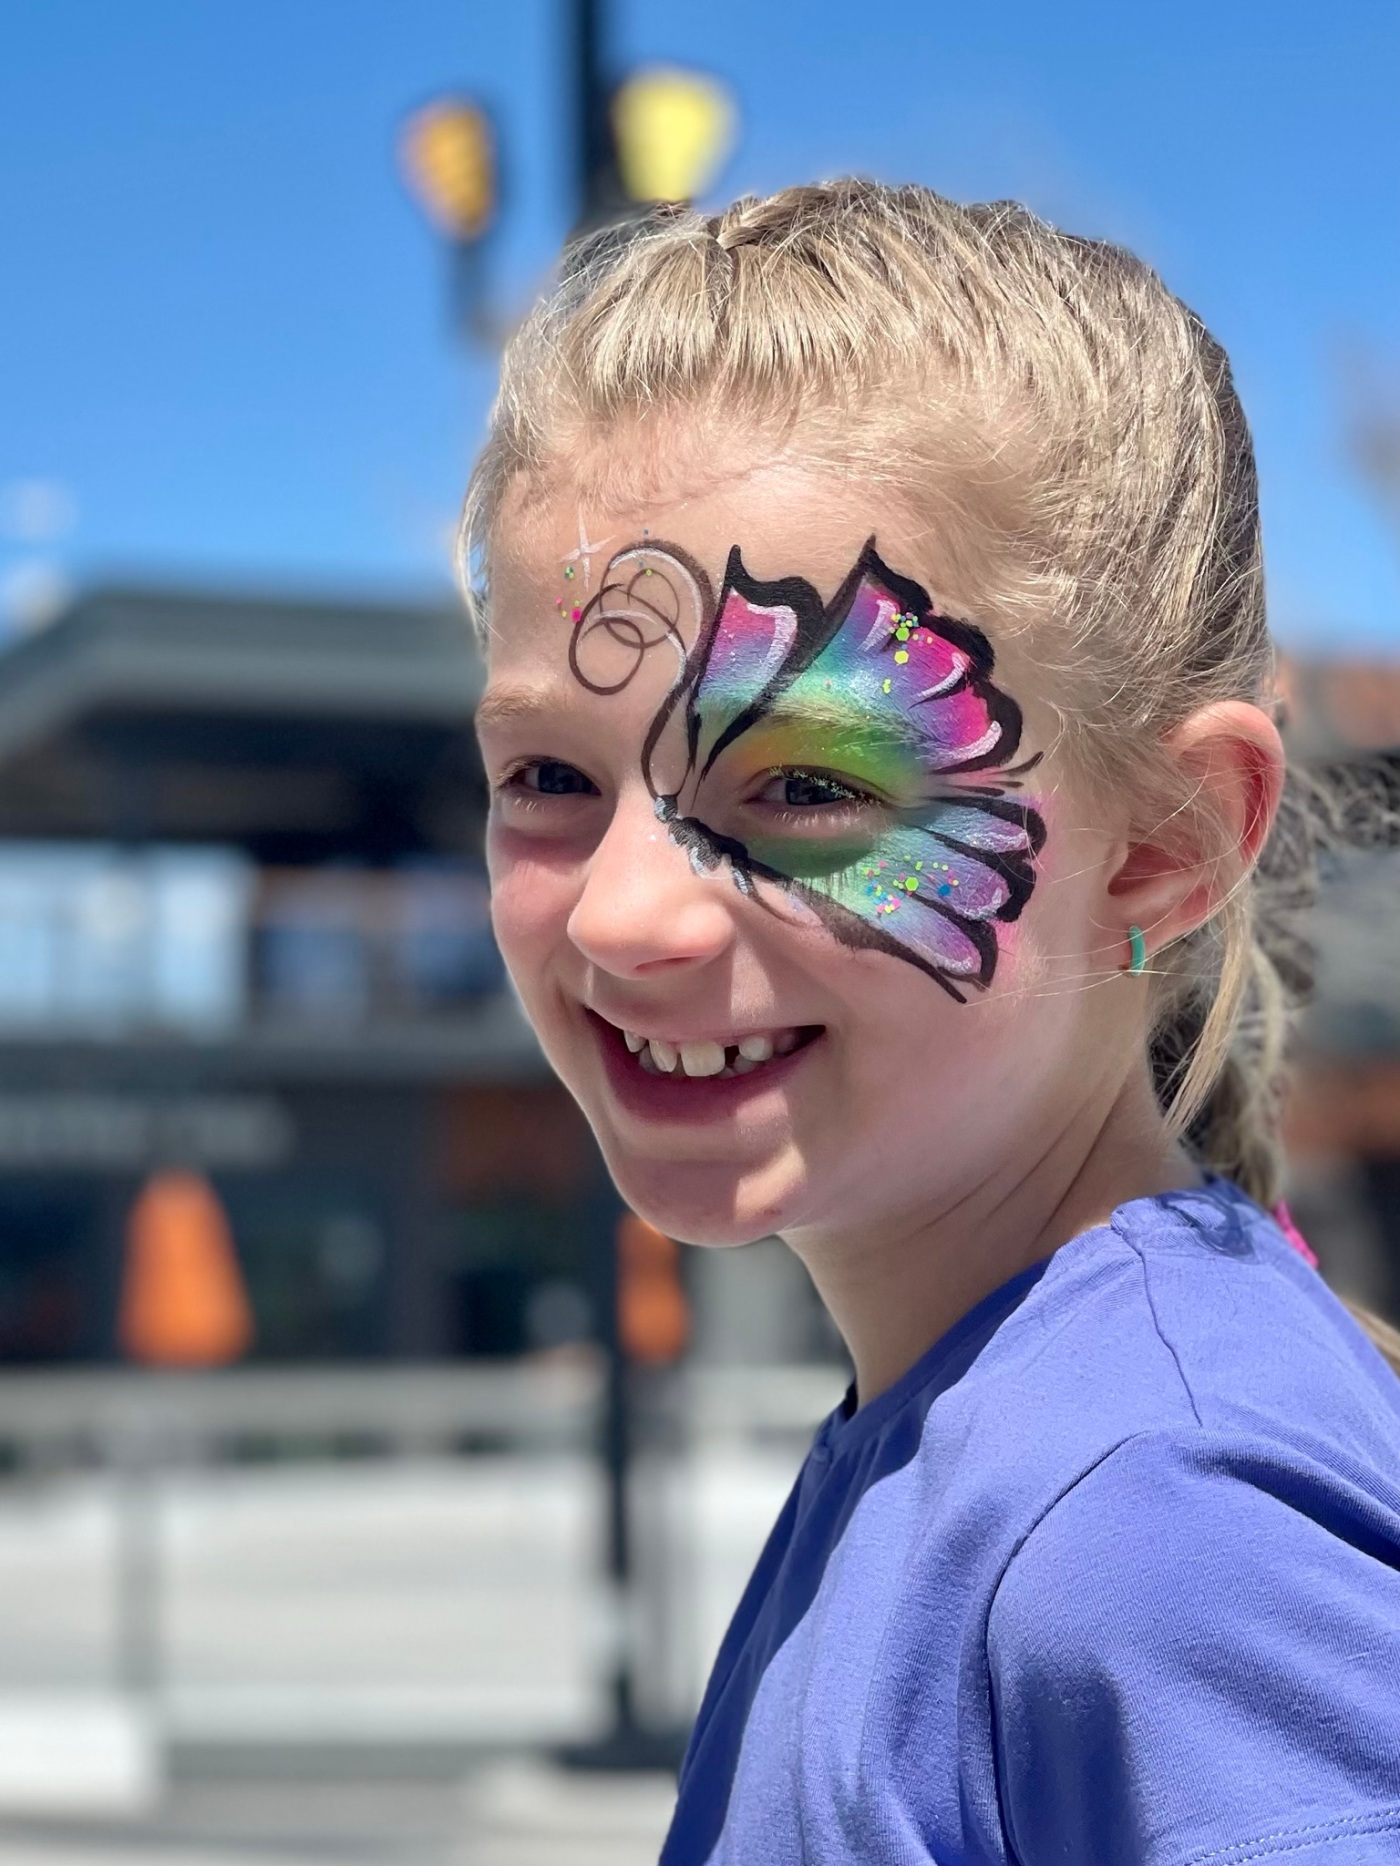 Salt Lake City's #1 Face painting service!  Serving South Salt Lake,  Holladay, Millcreek, Sugarhouse, Murray, West Jordan, Draper, Sandy, West  Valley, Taylorsville and much more!